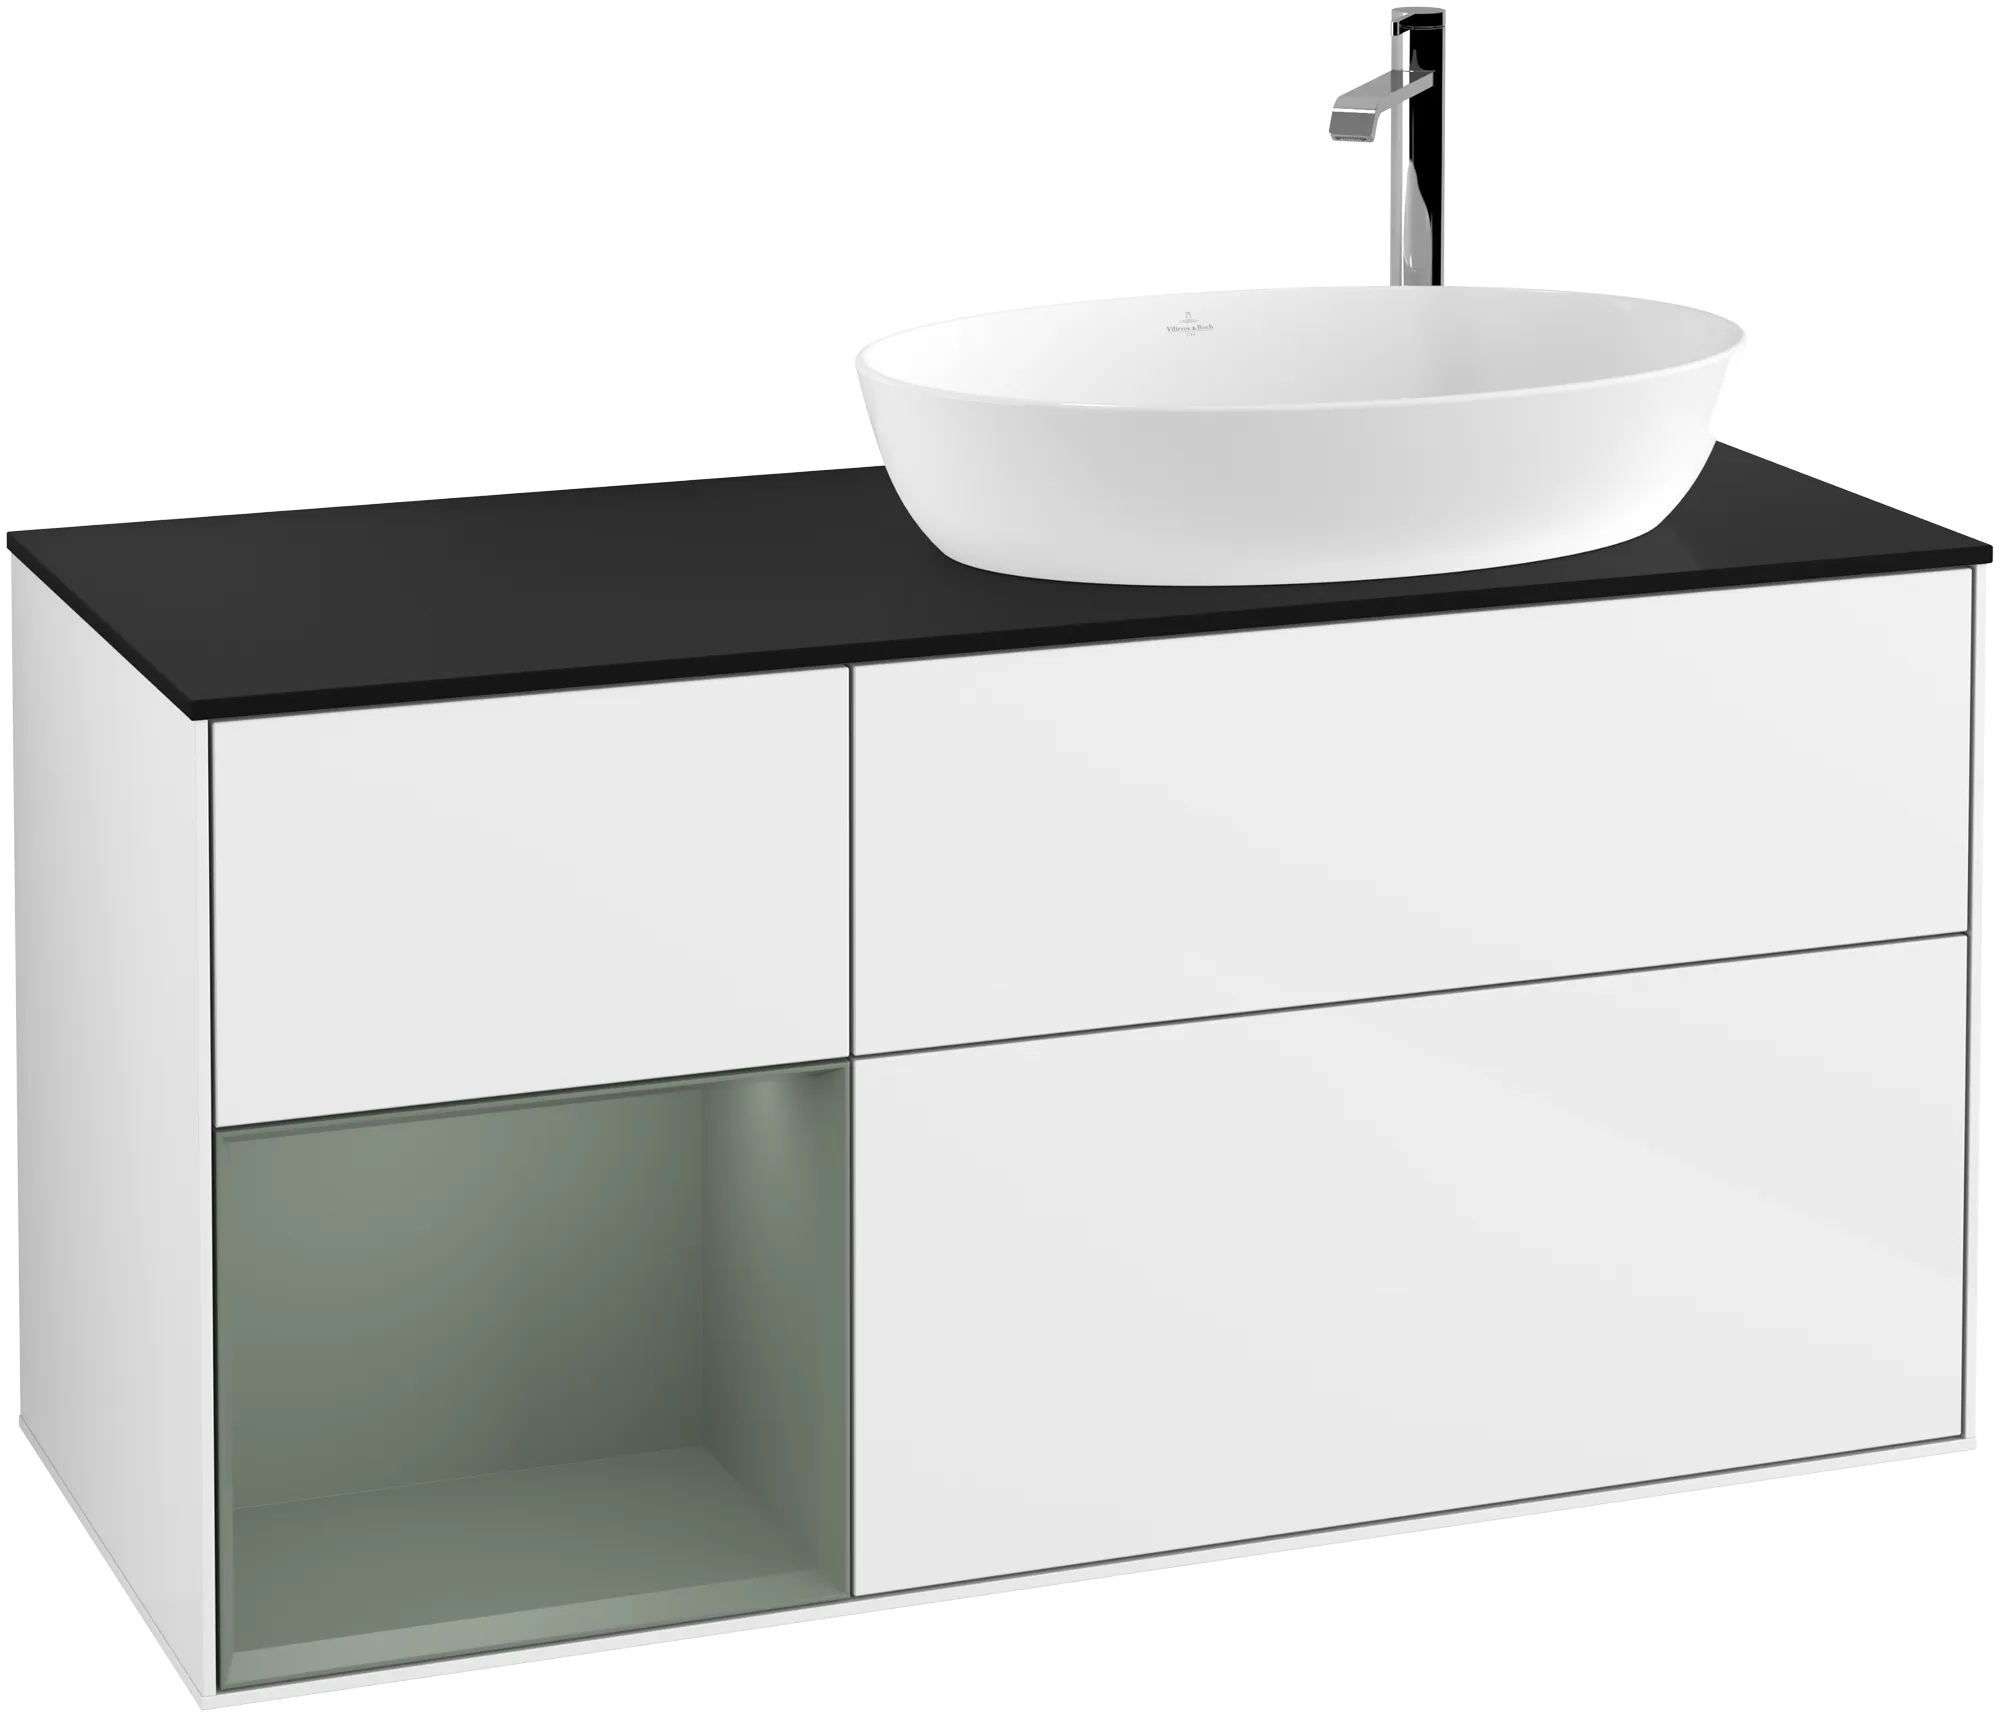 Obrázek VILLEROY BOCH Finion Vanity unit, with lighting, 3 pull-out compartments, 1200 x 603 x 501 mm, Glossy White Lacquer / Olive Matt Lacquer / Glass Black Matt #G922GMGF